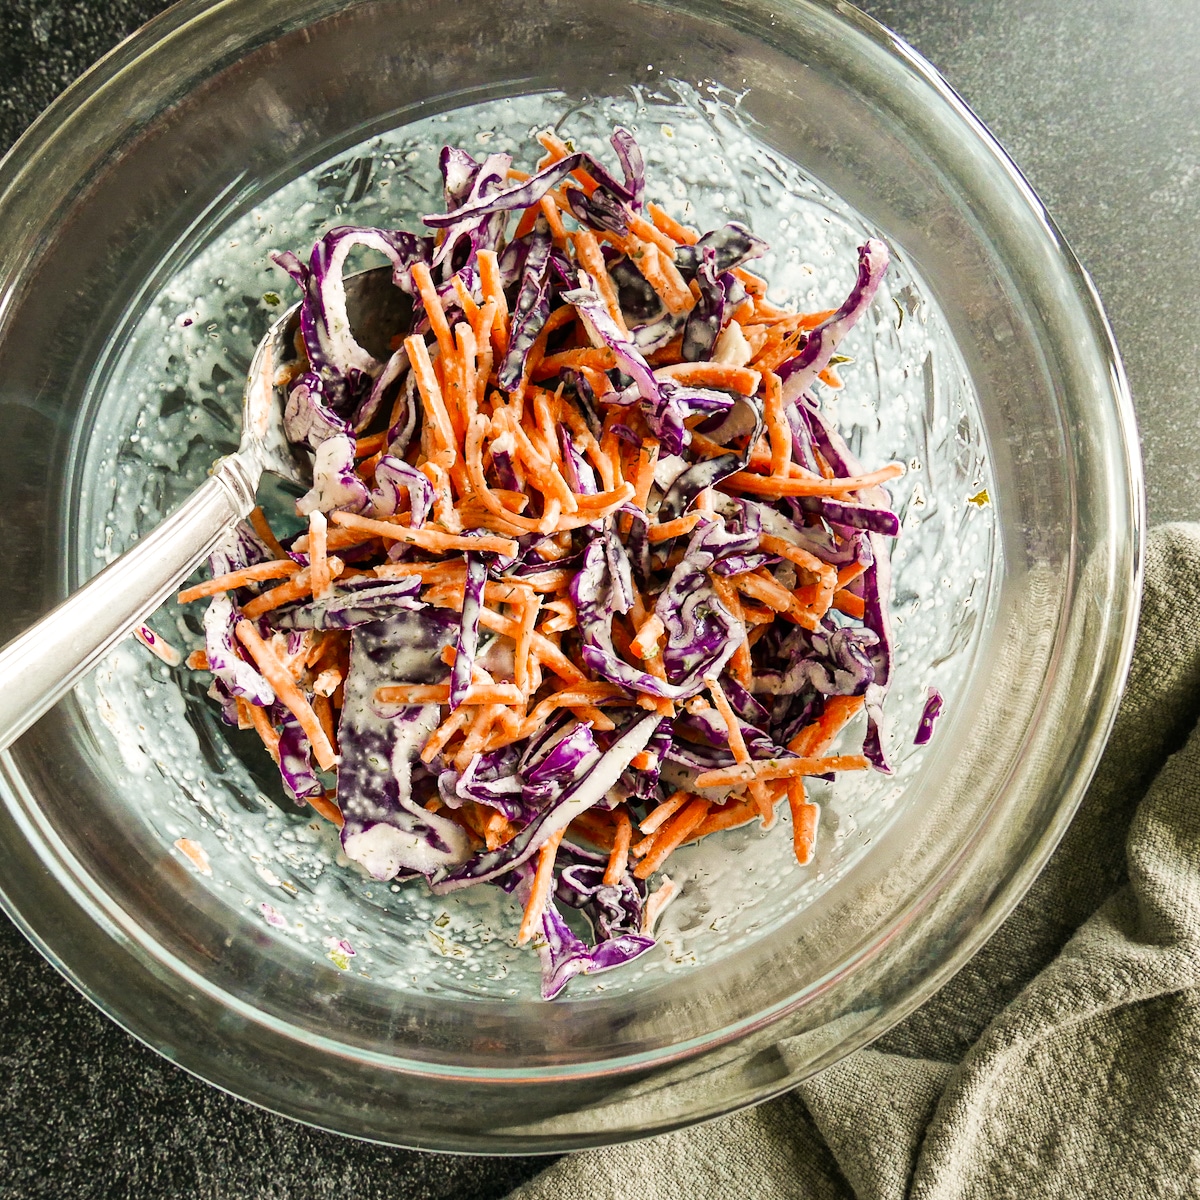 Ranch slaw mixed together in a mixing bowl.